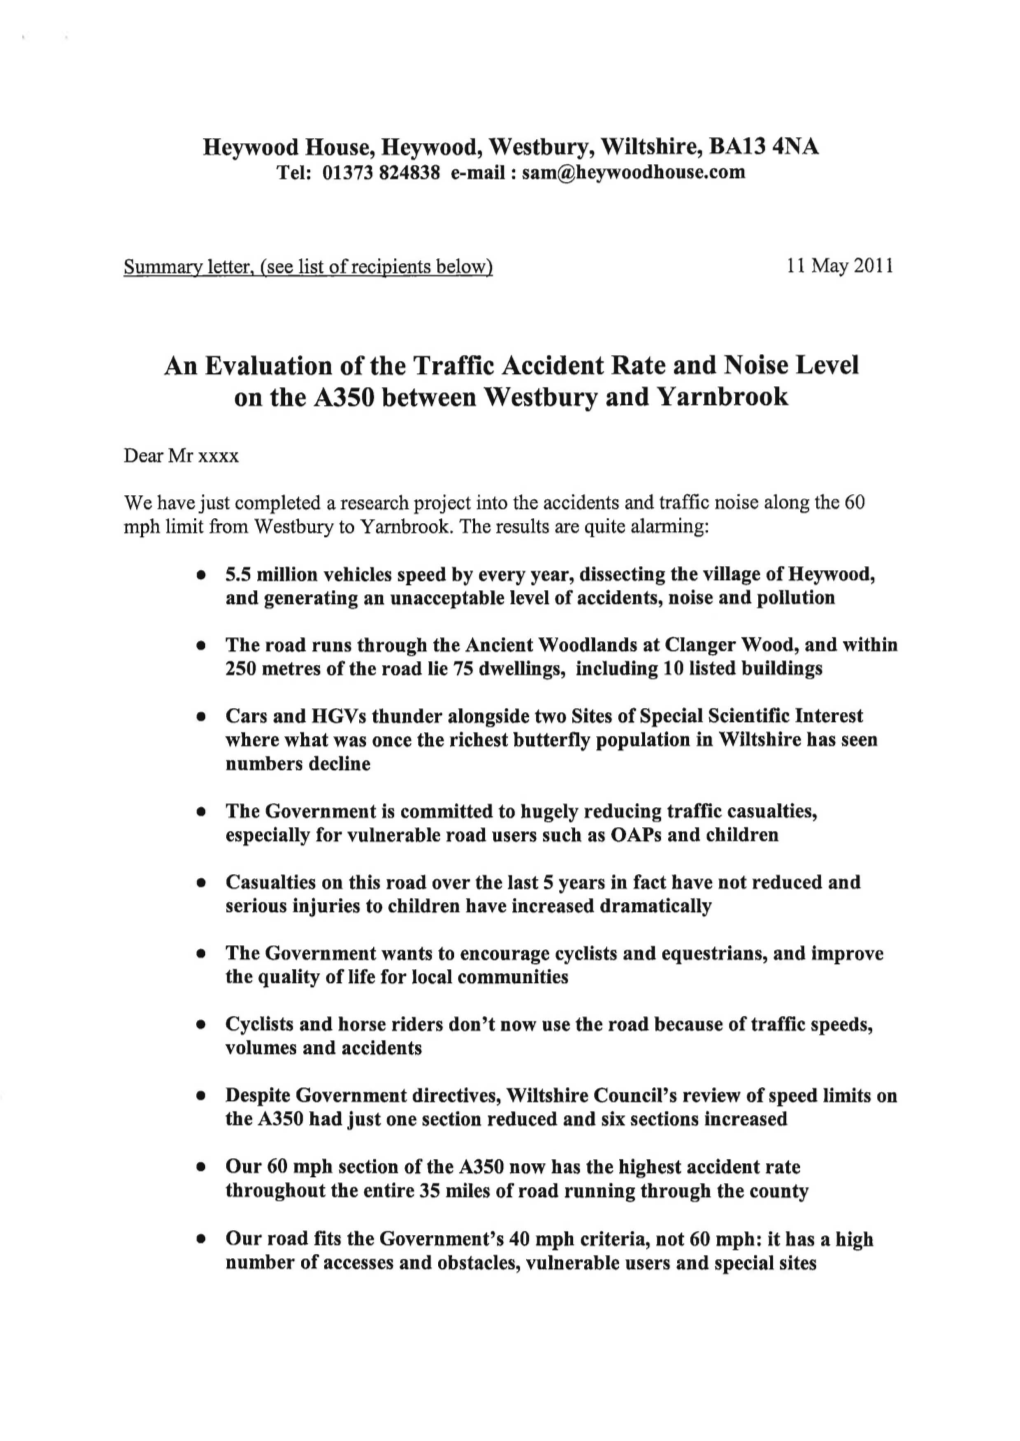 An Evaluation of the Traffic Accident Rate and Noise Level on the A350 Between Westbury and Yarnbrook